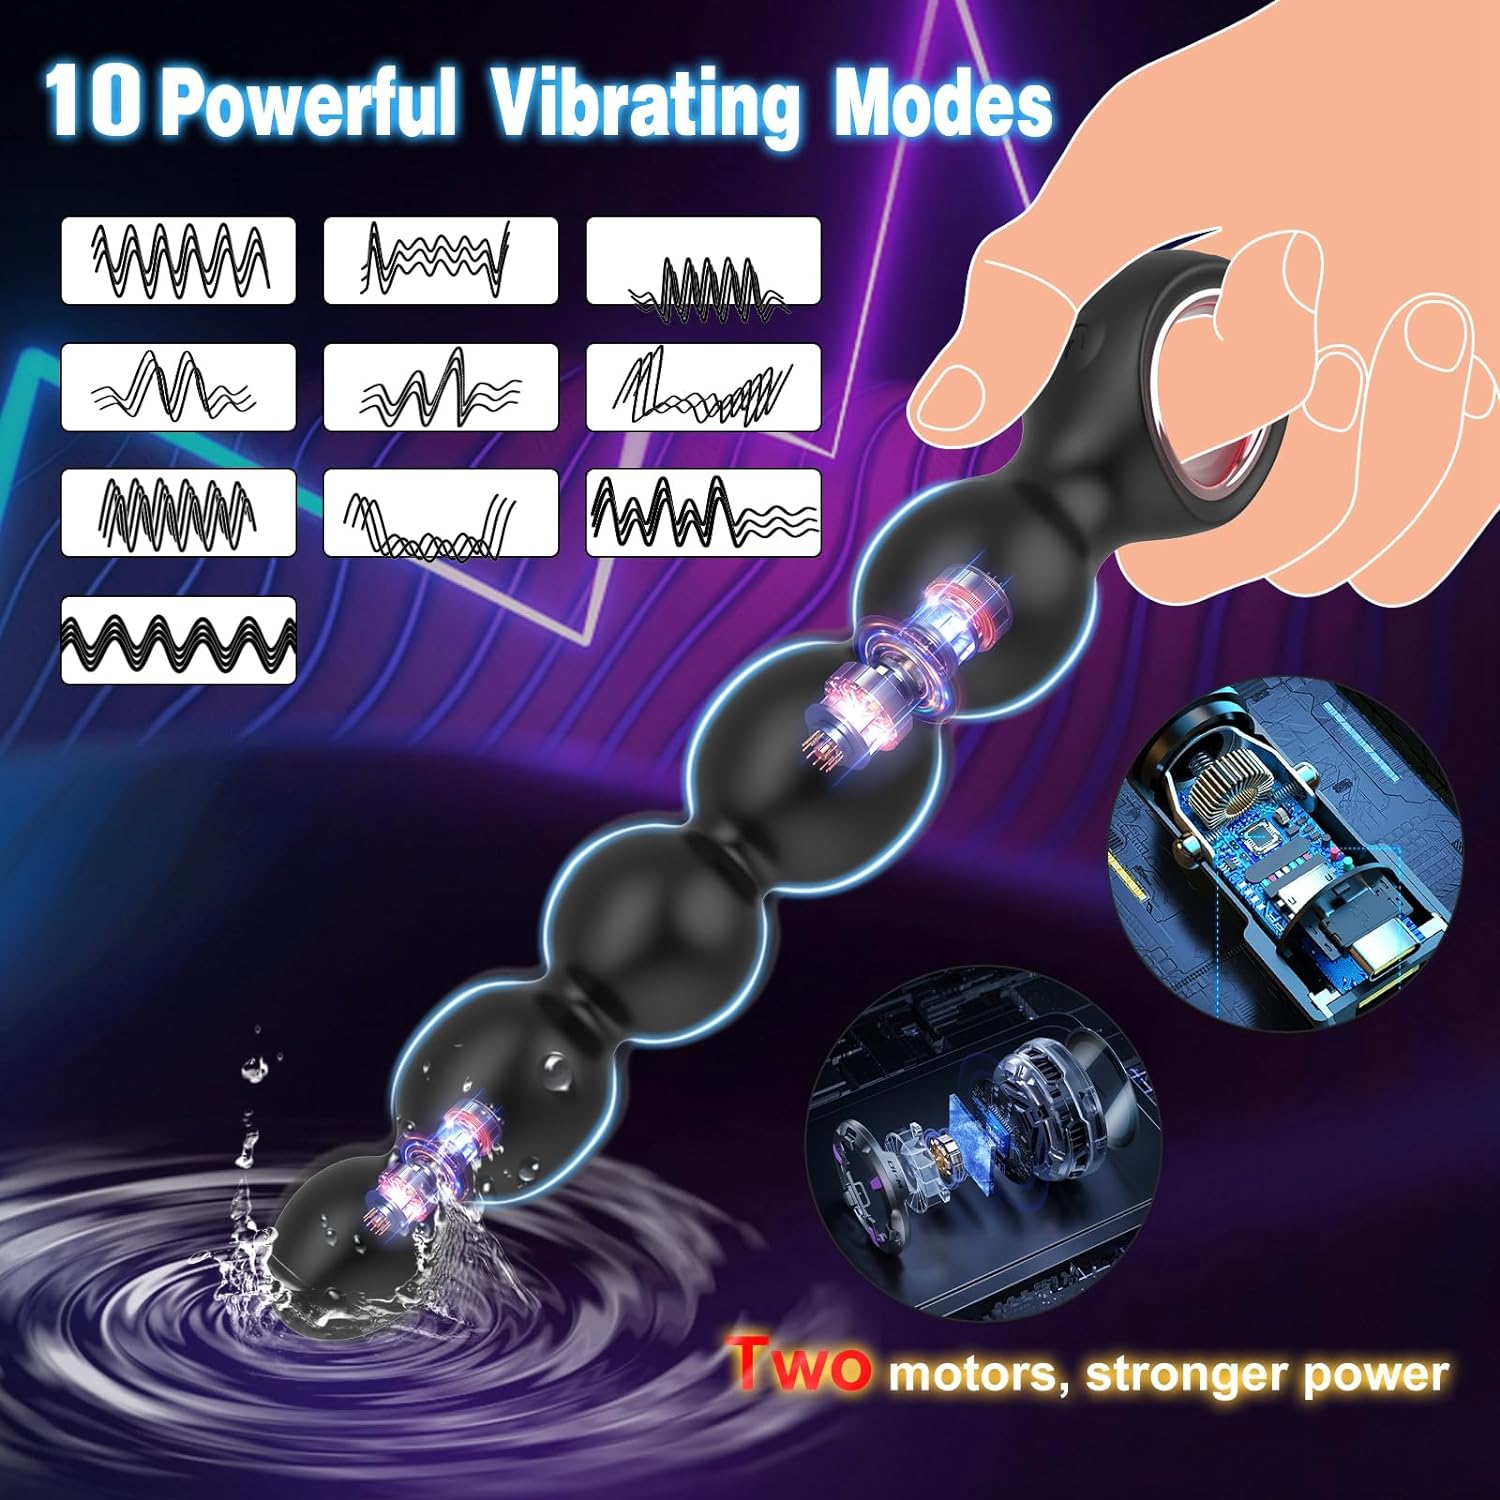 Anal Beads Sex Toys for Men, Anal Vibrator with Pull Ring Design Adult Toys Prostate Massager with 2 Powerful Motors & 10 Vibrating Modes, Male Sex Toys Dildo Anal Butt Plug for Men Women Couples